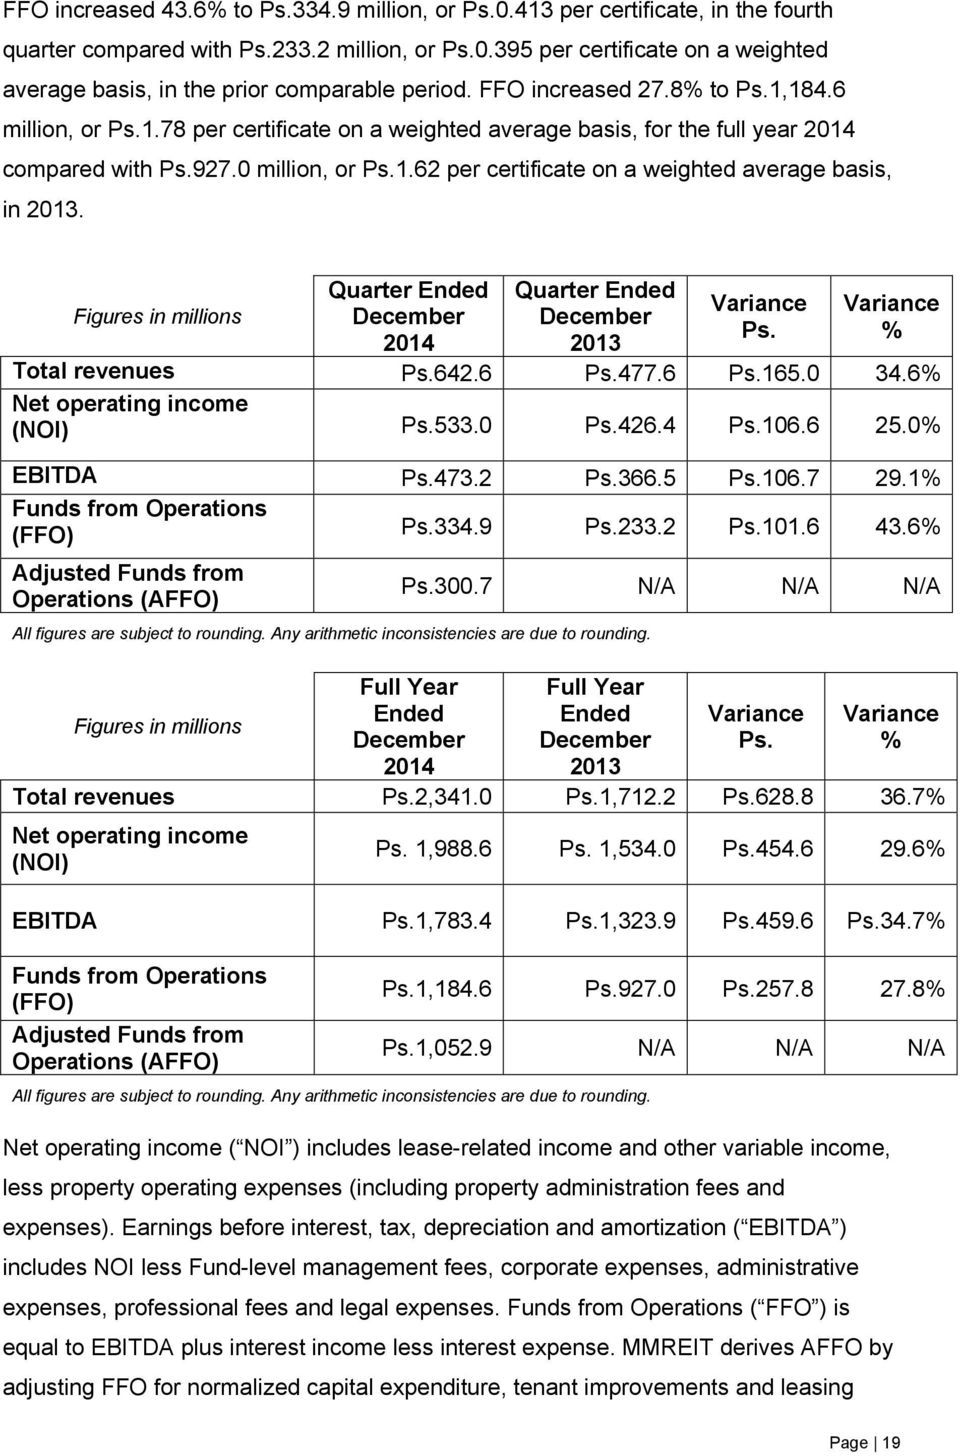 Figures in millions Quarter Ended December 2014 Quarter Ended December 2013 Variance Ps. Variance % Total revenues Ps.642.6 Ps.477.6 Ps.165.0 34.6% Net operating income (NOI) Ps.533.0 Ps.426.4 Ps.106.